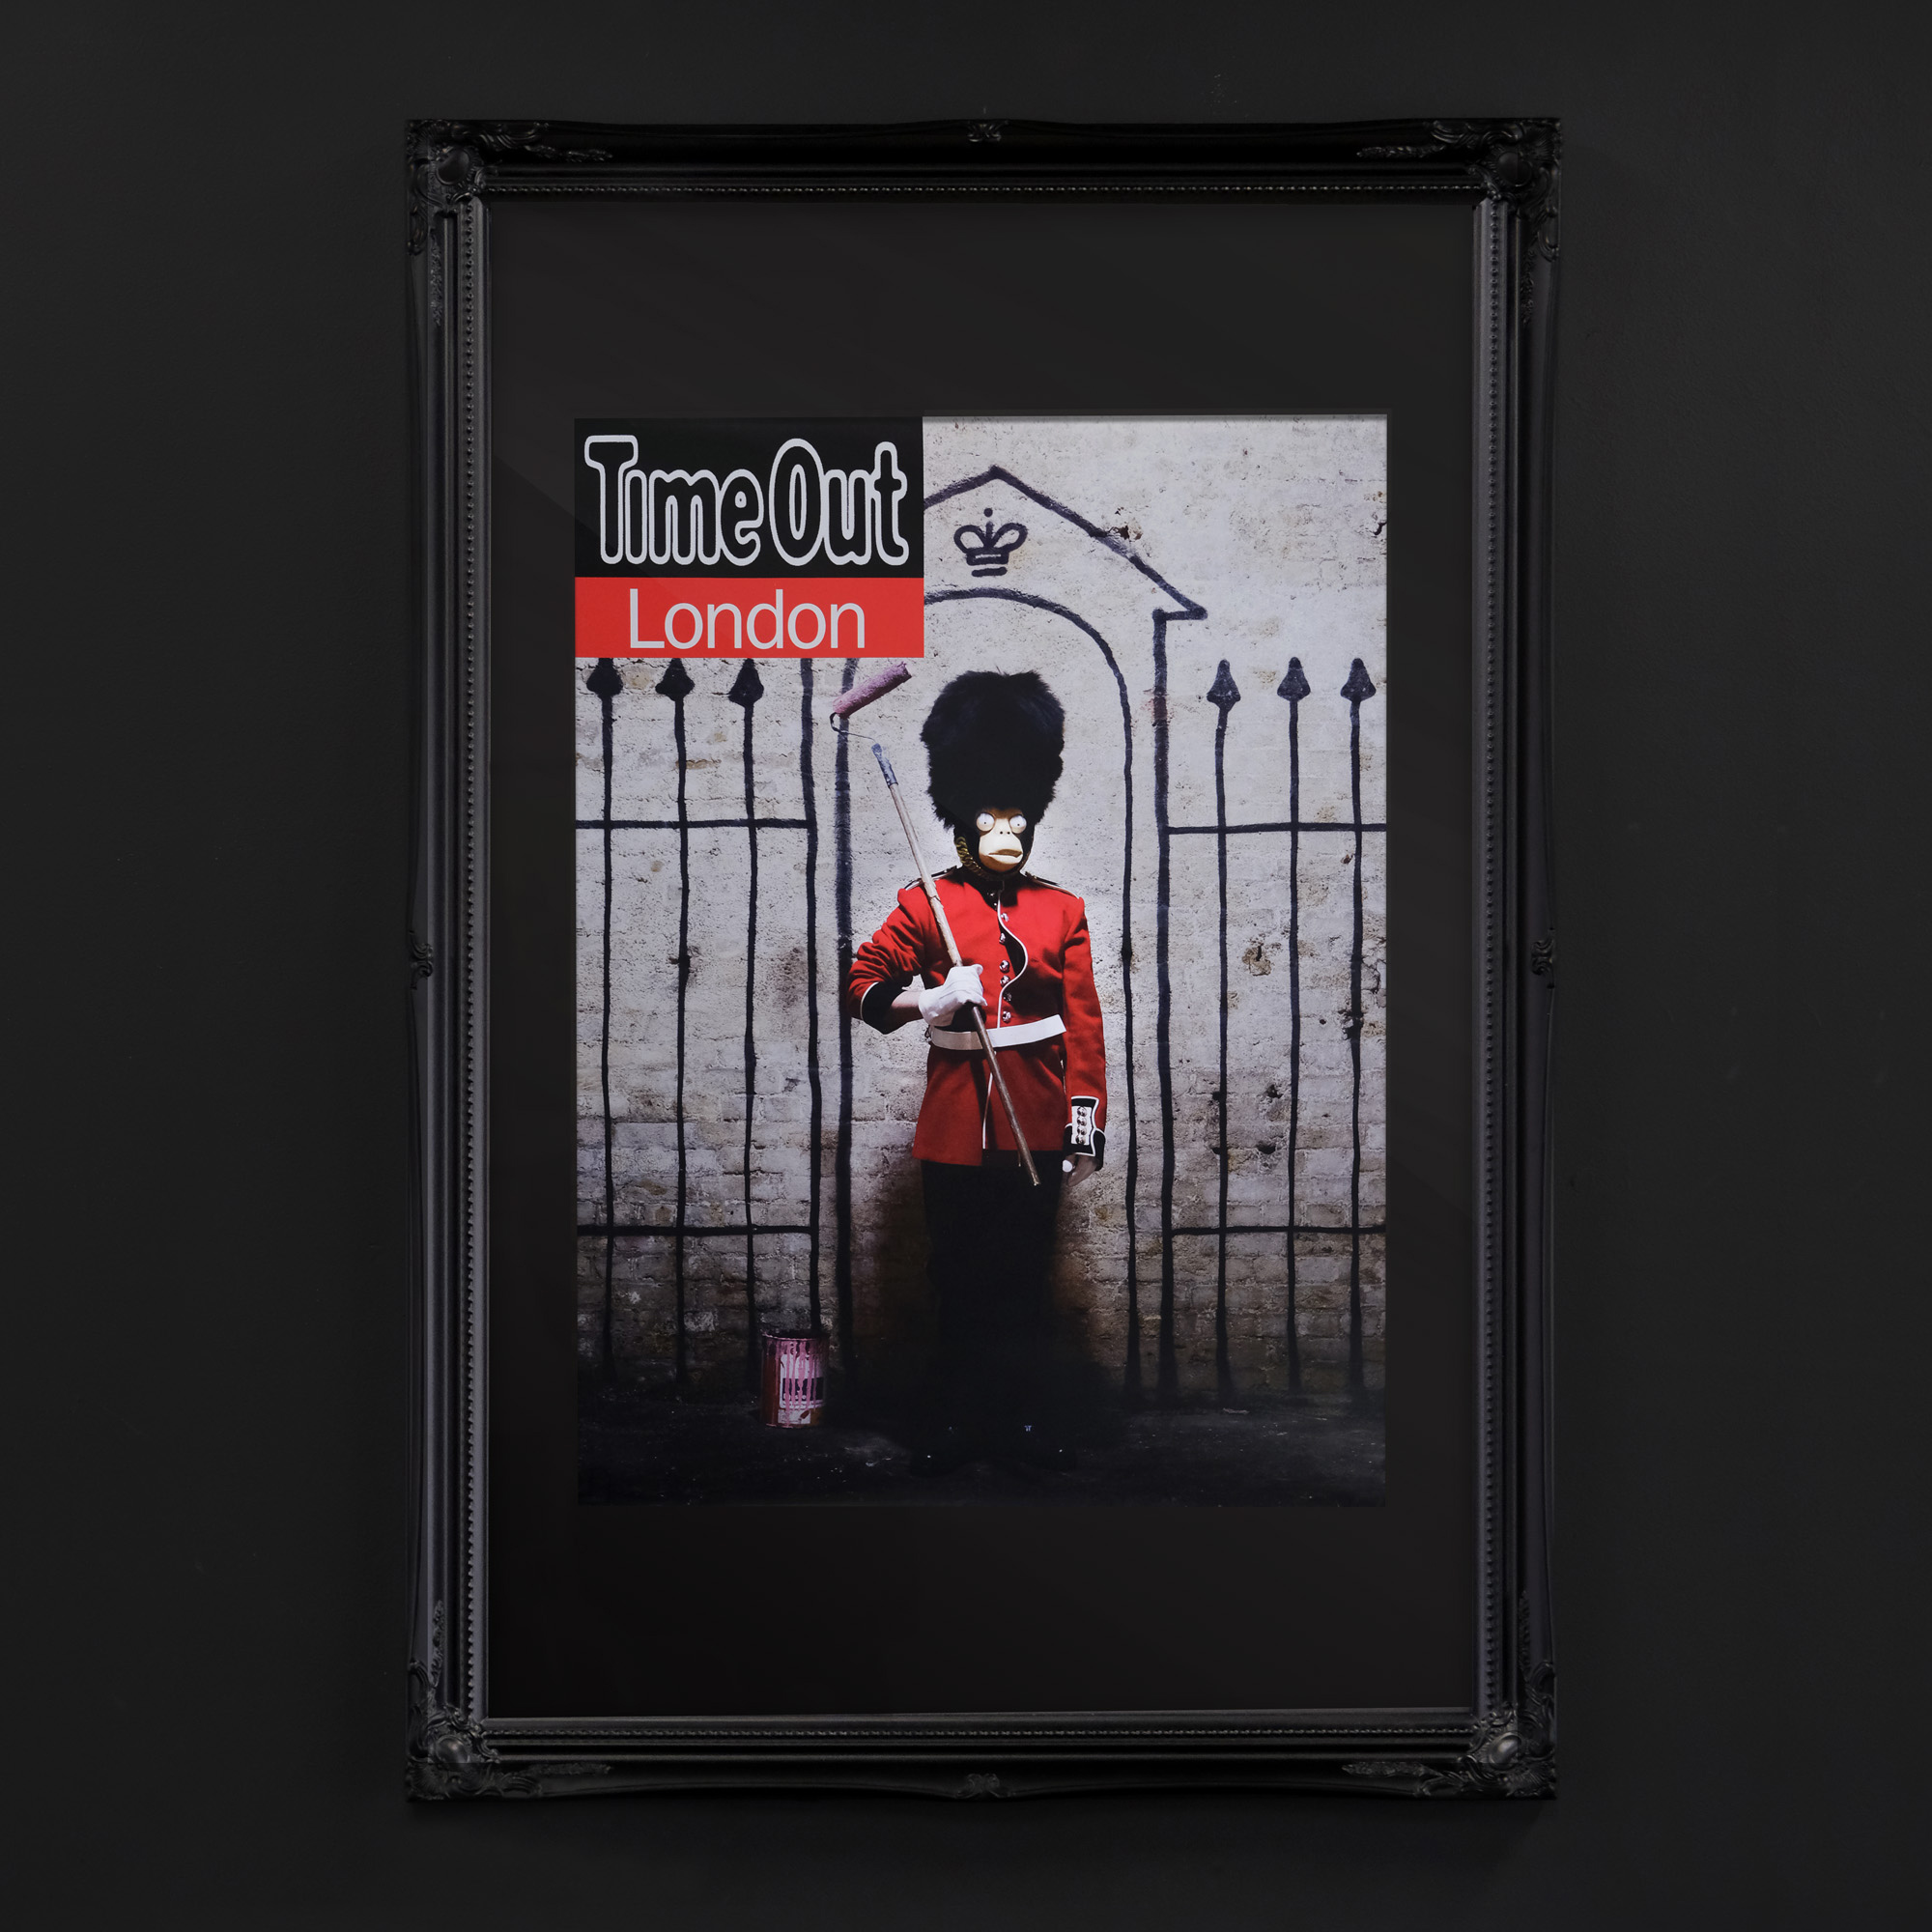 framed poster by Banksy street artist of beefeater soldier